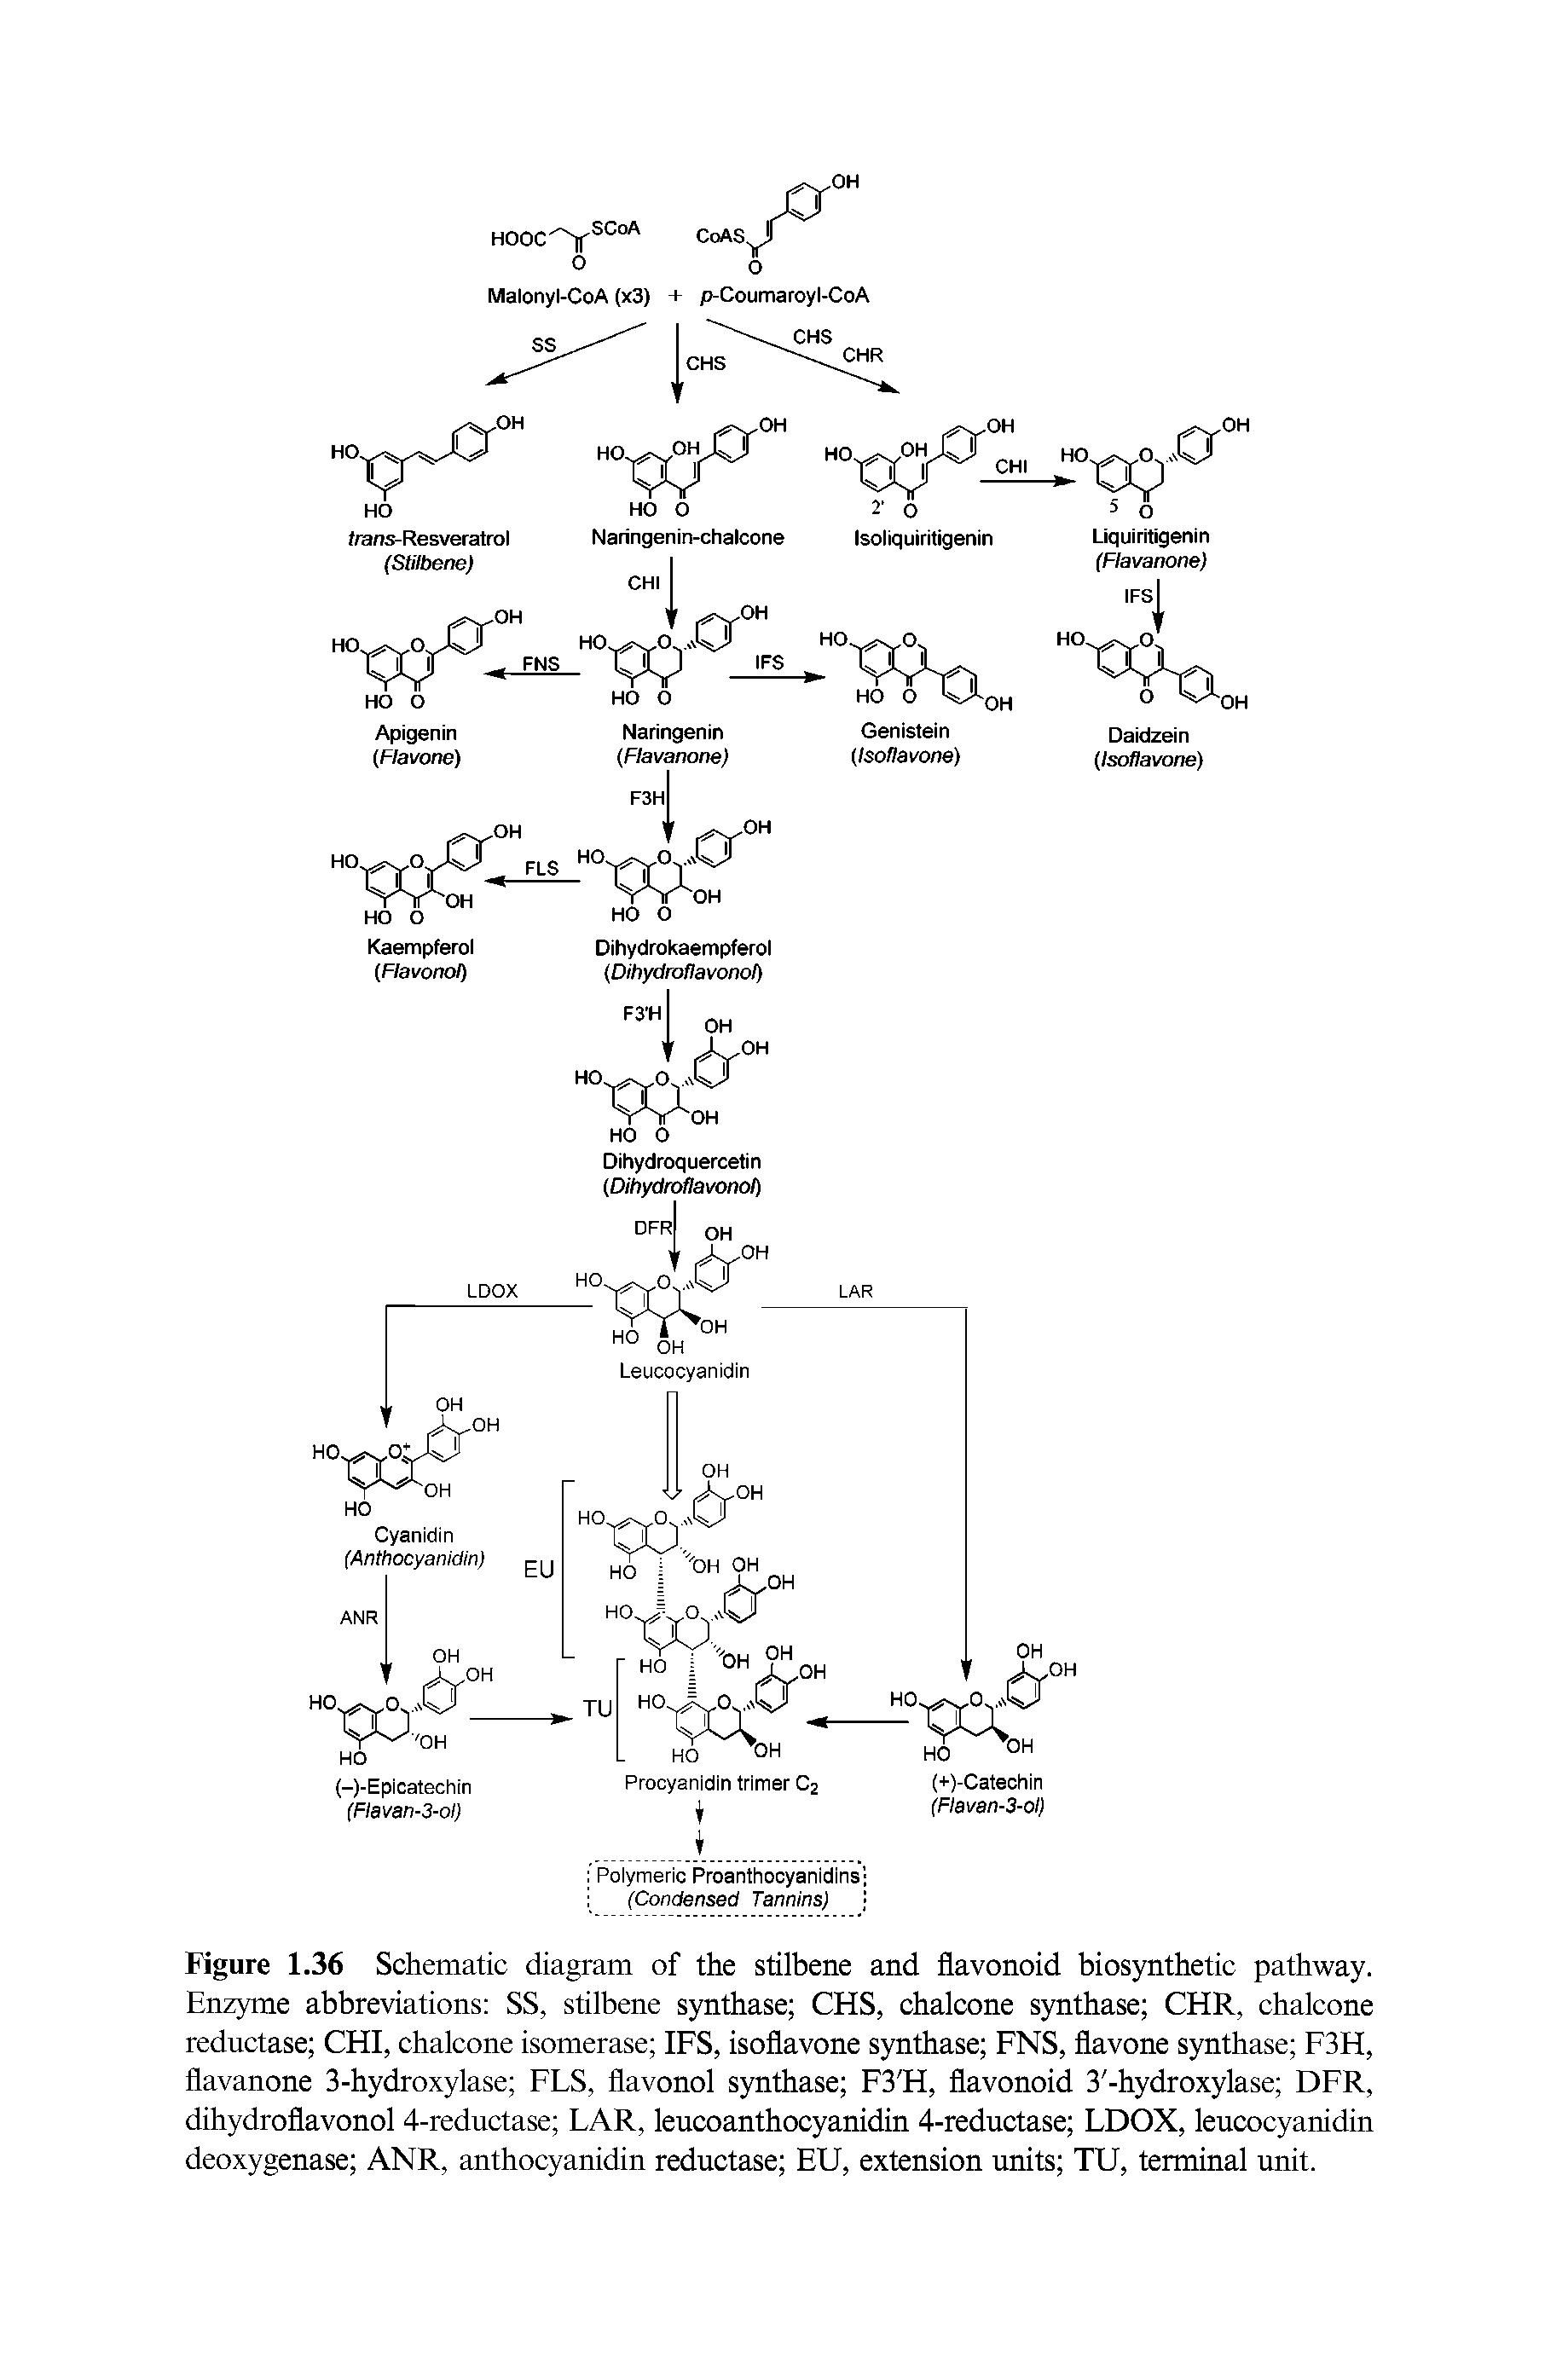 Figure 1.36 Schematic diagram of the stilbene and flavonoid biosynthetic pathway. Enzyme abbreviations SS, stilbene synthase CHS, chalcone synthase CHR, chalcone reductase CHI, chalcone isomerase IFS, isoflavone synthase FNS, flavone synthase F3H, flavanone 3-hydroxylase FLS, flavonol synthase F3 H, flavonoid 3 -hydroxylase DFR, dihydroflavonol 4-reductase LAR, leucoanthocyanidin 4-reductase LDOX, leucocyanidin deoxygenase ANR, anthocyanidin reductase EU, extension units TU, terminal unit.